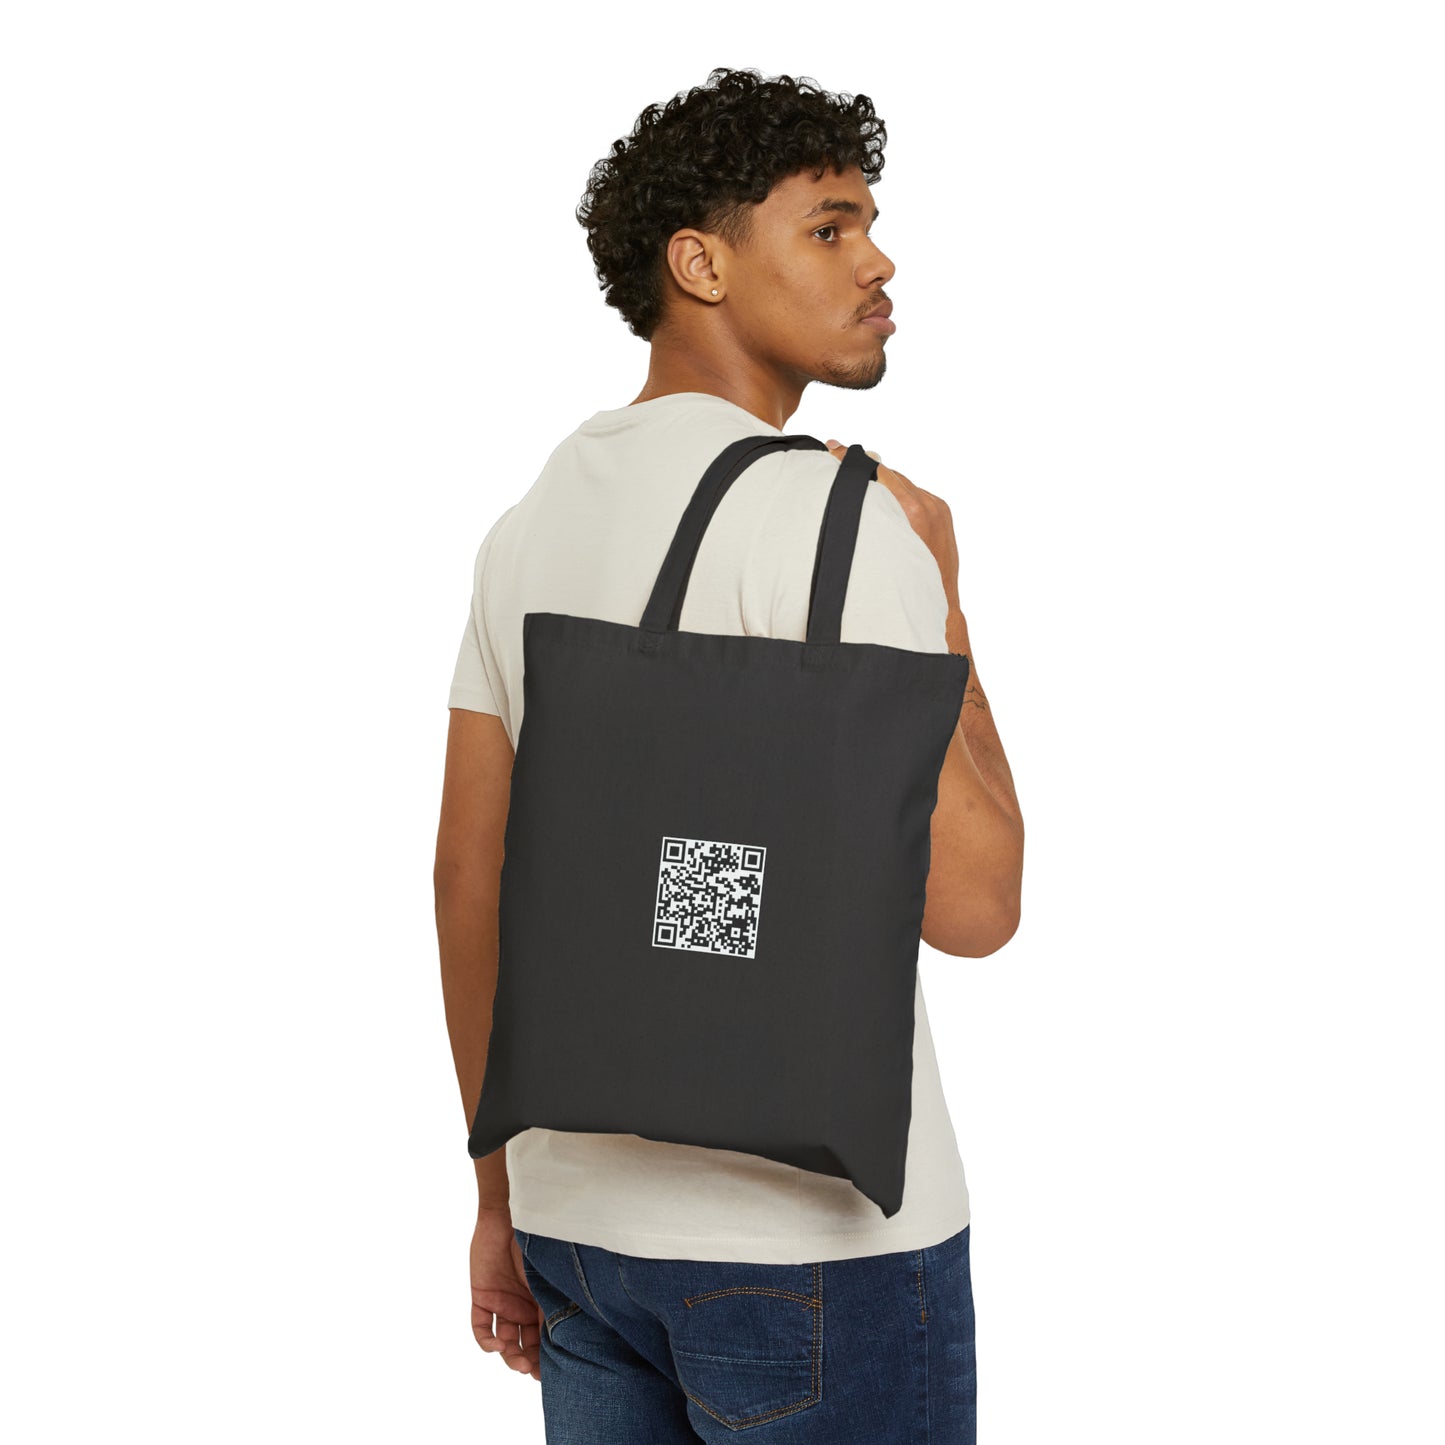 Ghostly Park - Cotton Canvas Tote Bag